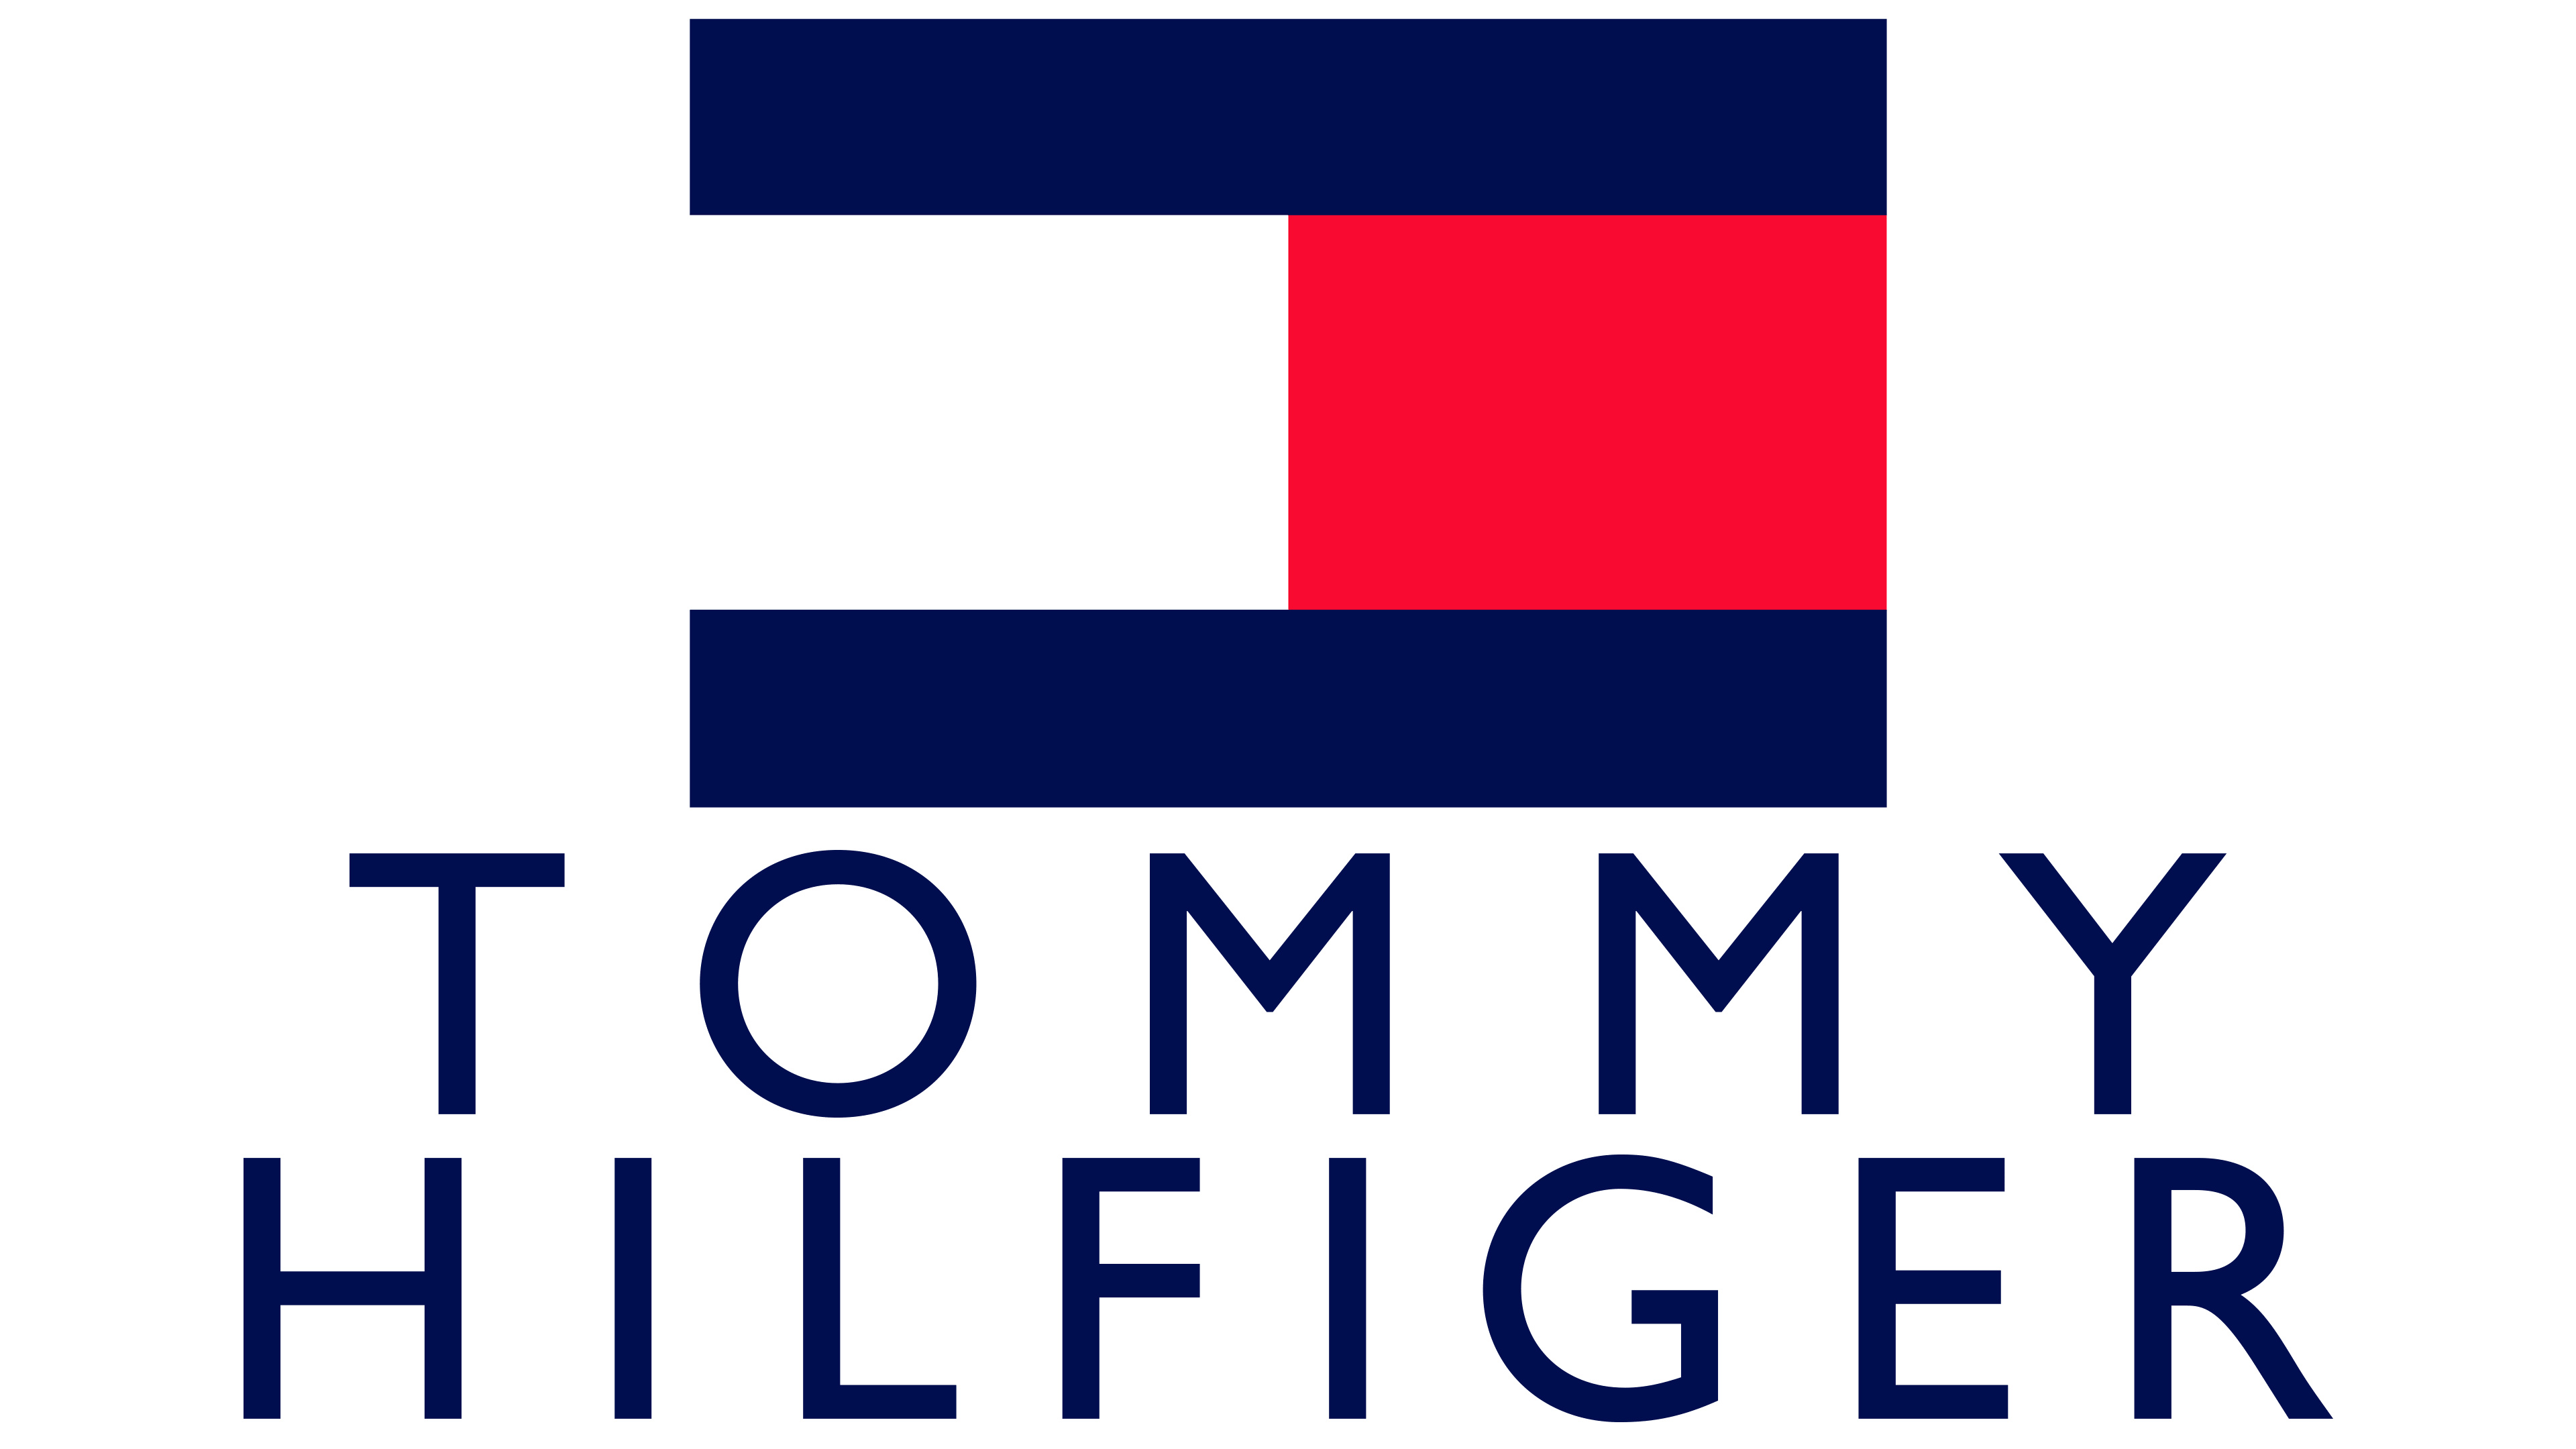 Tommy Hilfiger: One of the world's most recognized premium lifestyle brands, Logo. 3840x2160 4K Wallpaper.